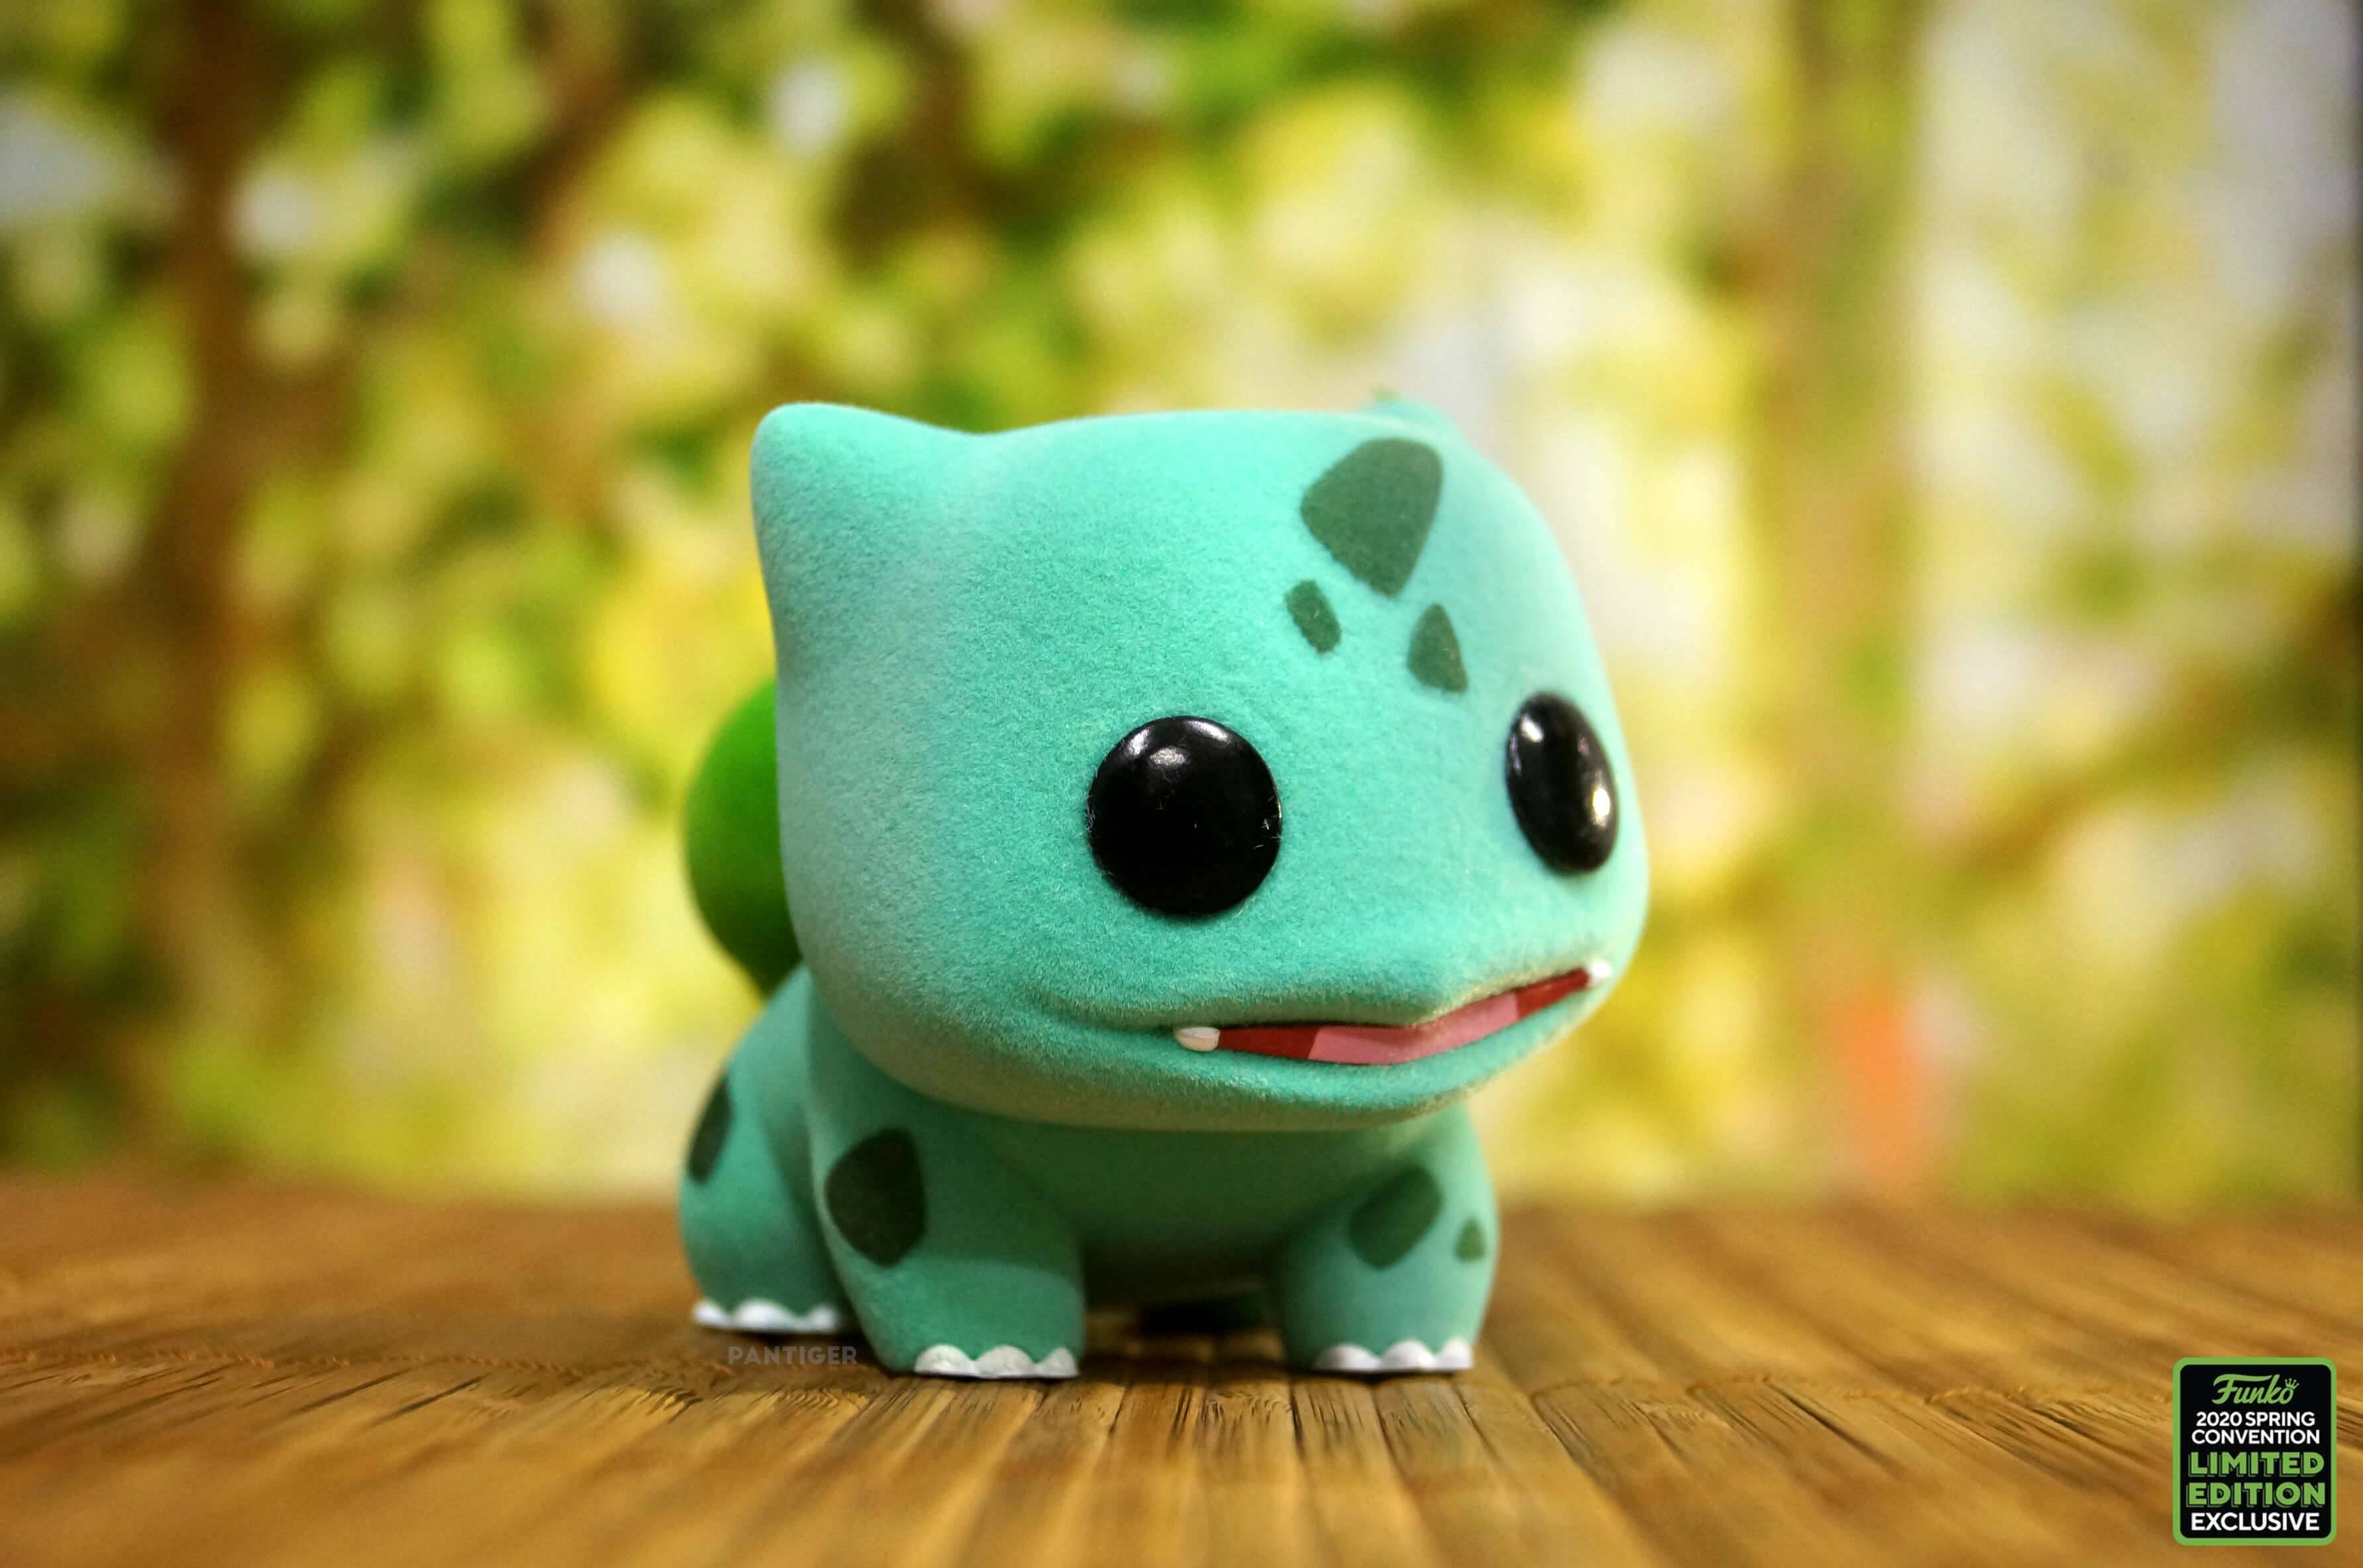 Bulbasaur (flocked) is out now!